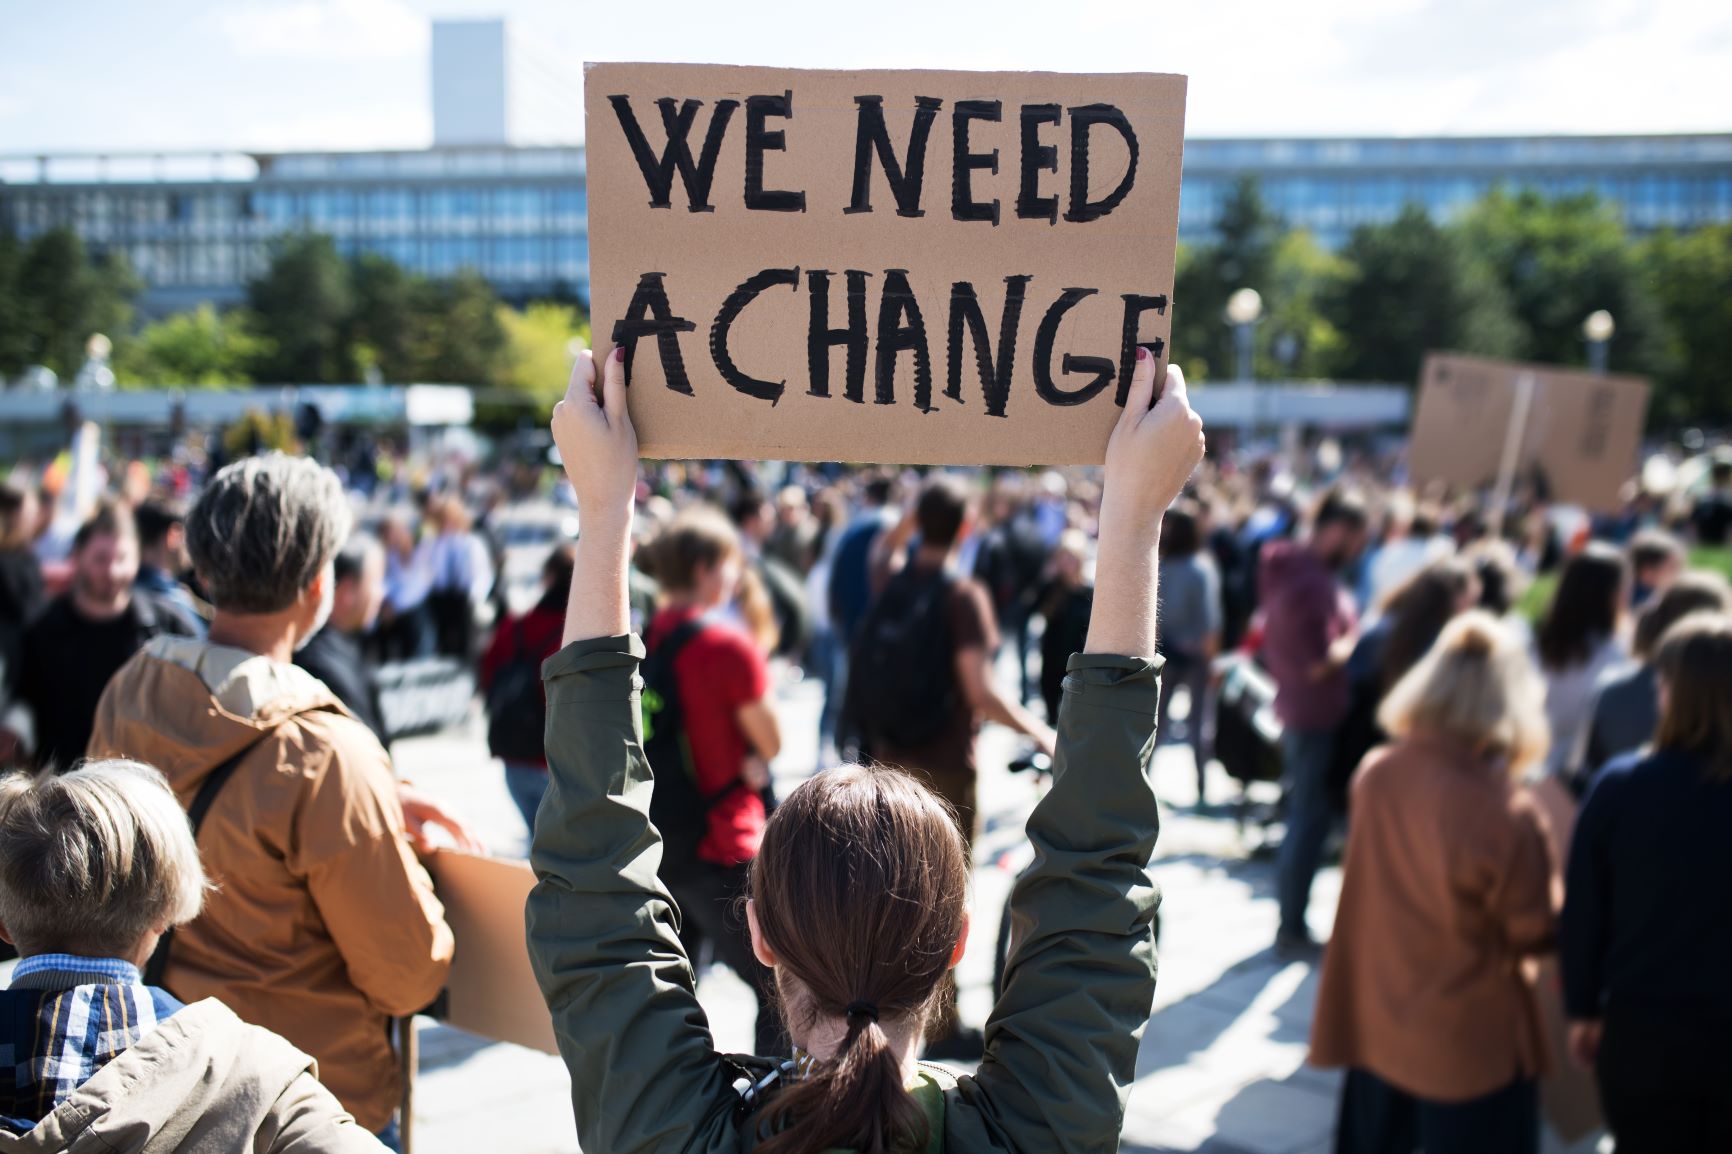 Sign at a protest reads "we need a change."